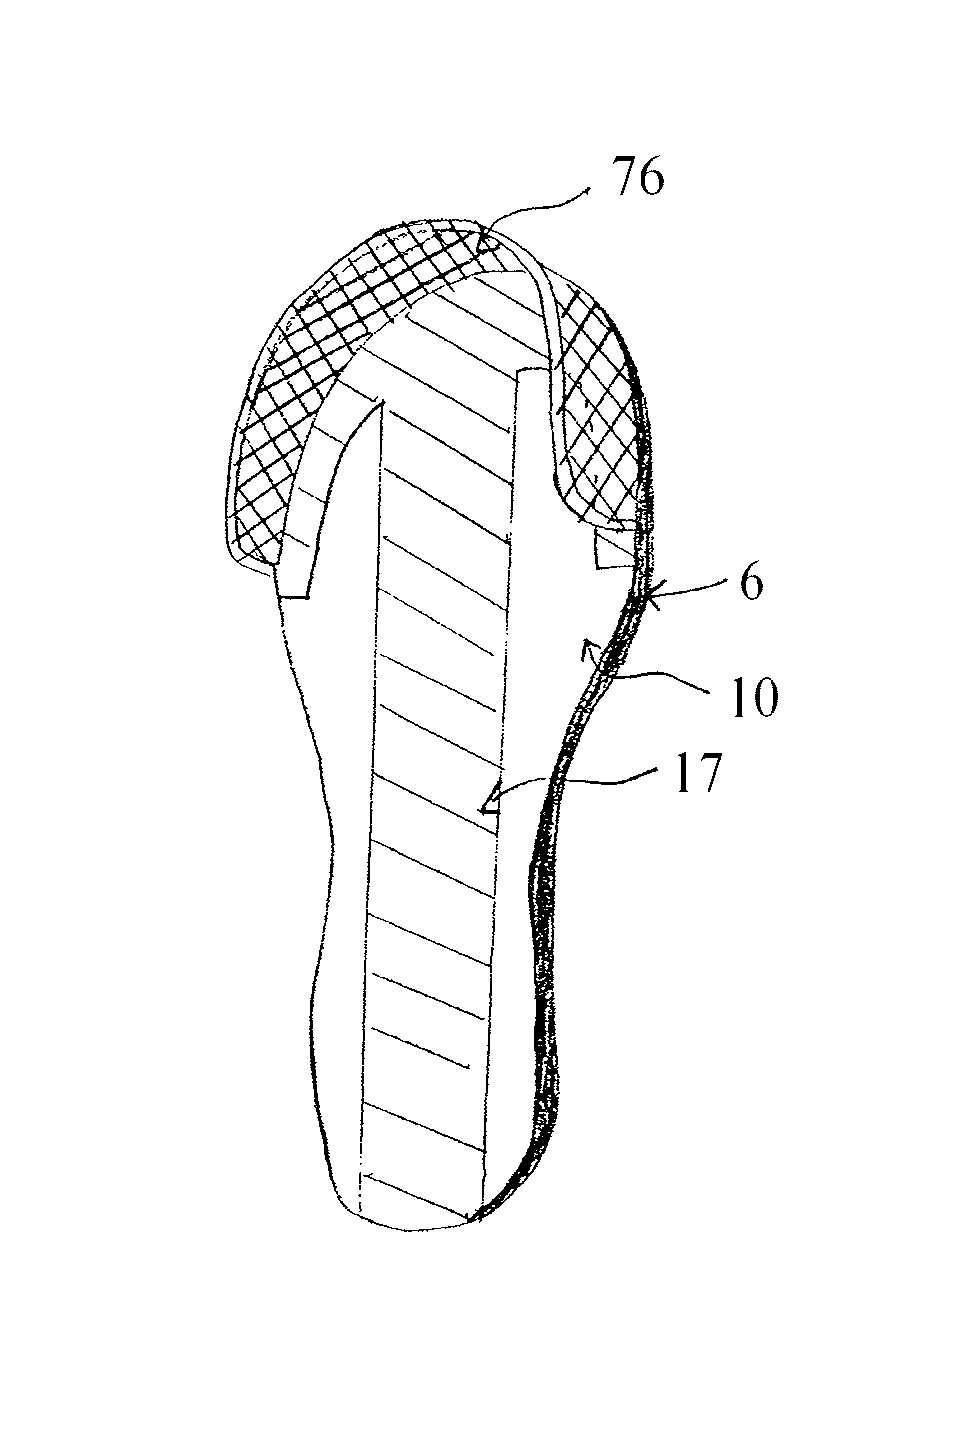 Soccer shoe component or insert made of one material and/or a composite and/or laminate of one or more materials for enhancing the performance of the soccer shoe